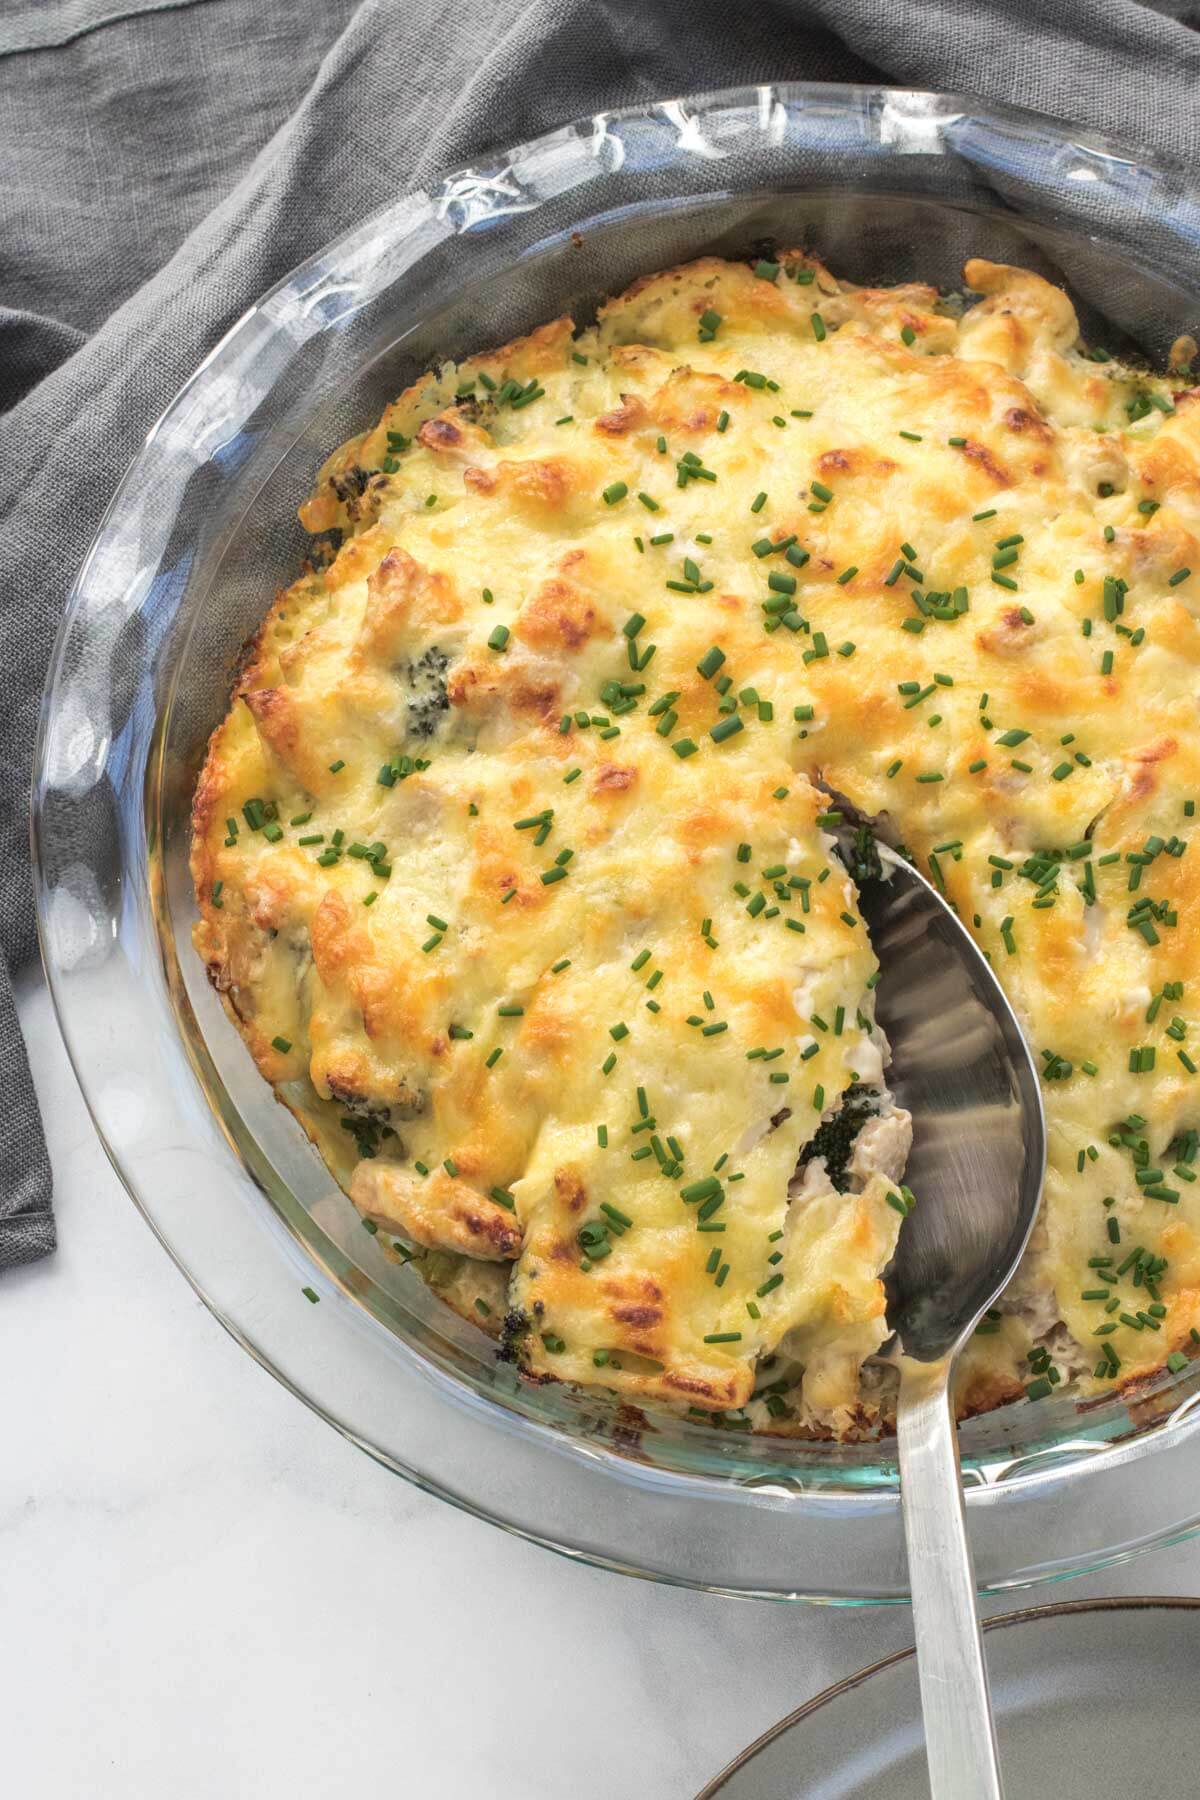 Baking dish with tuna mornay and a serving spoon ready to scoop out a serve.